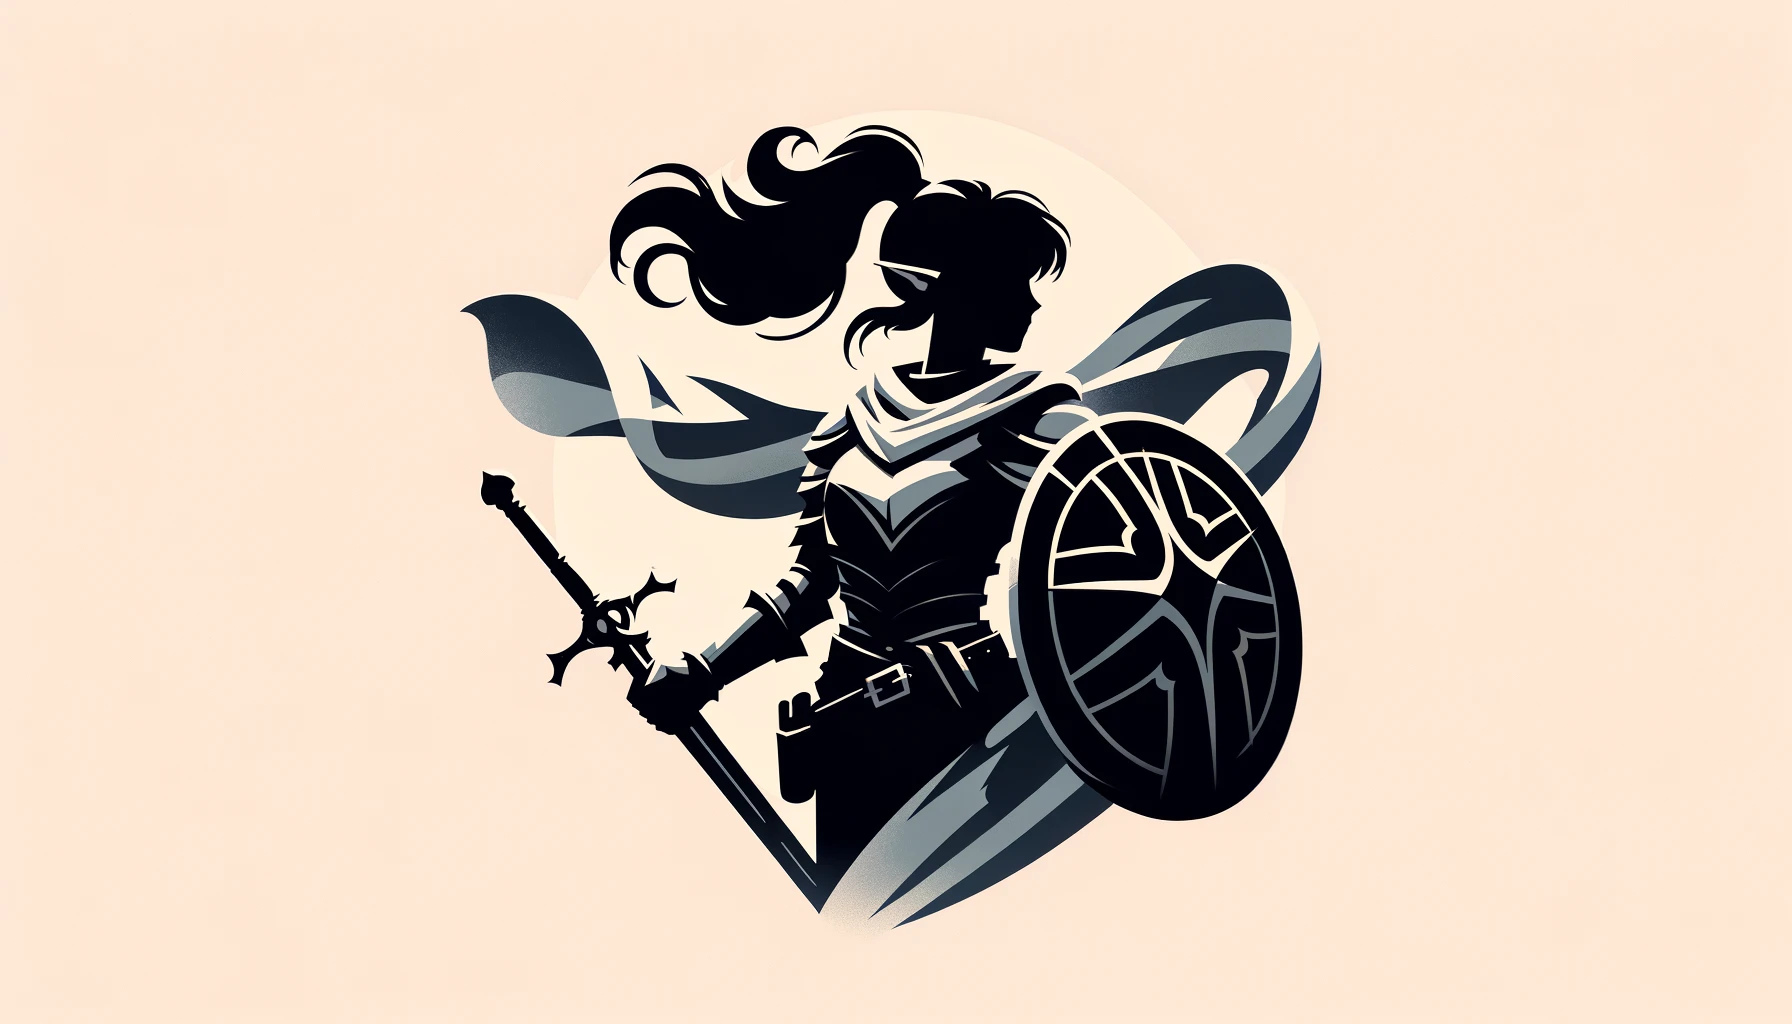 General 1792x1024 minimalism Dungeons & Dragons simple background sword shield women fictional character ribbon ponytail profile belt AI art female warrior pointy ears long hair armor women with swords cape